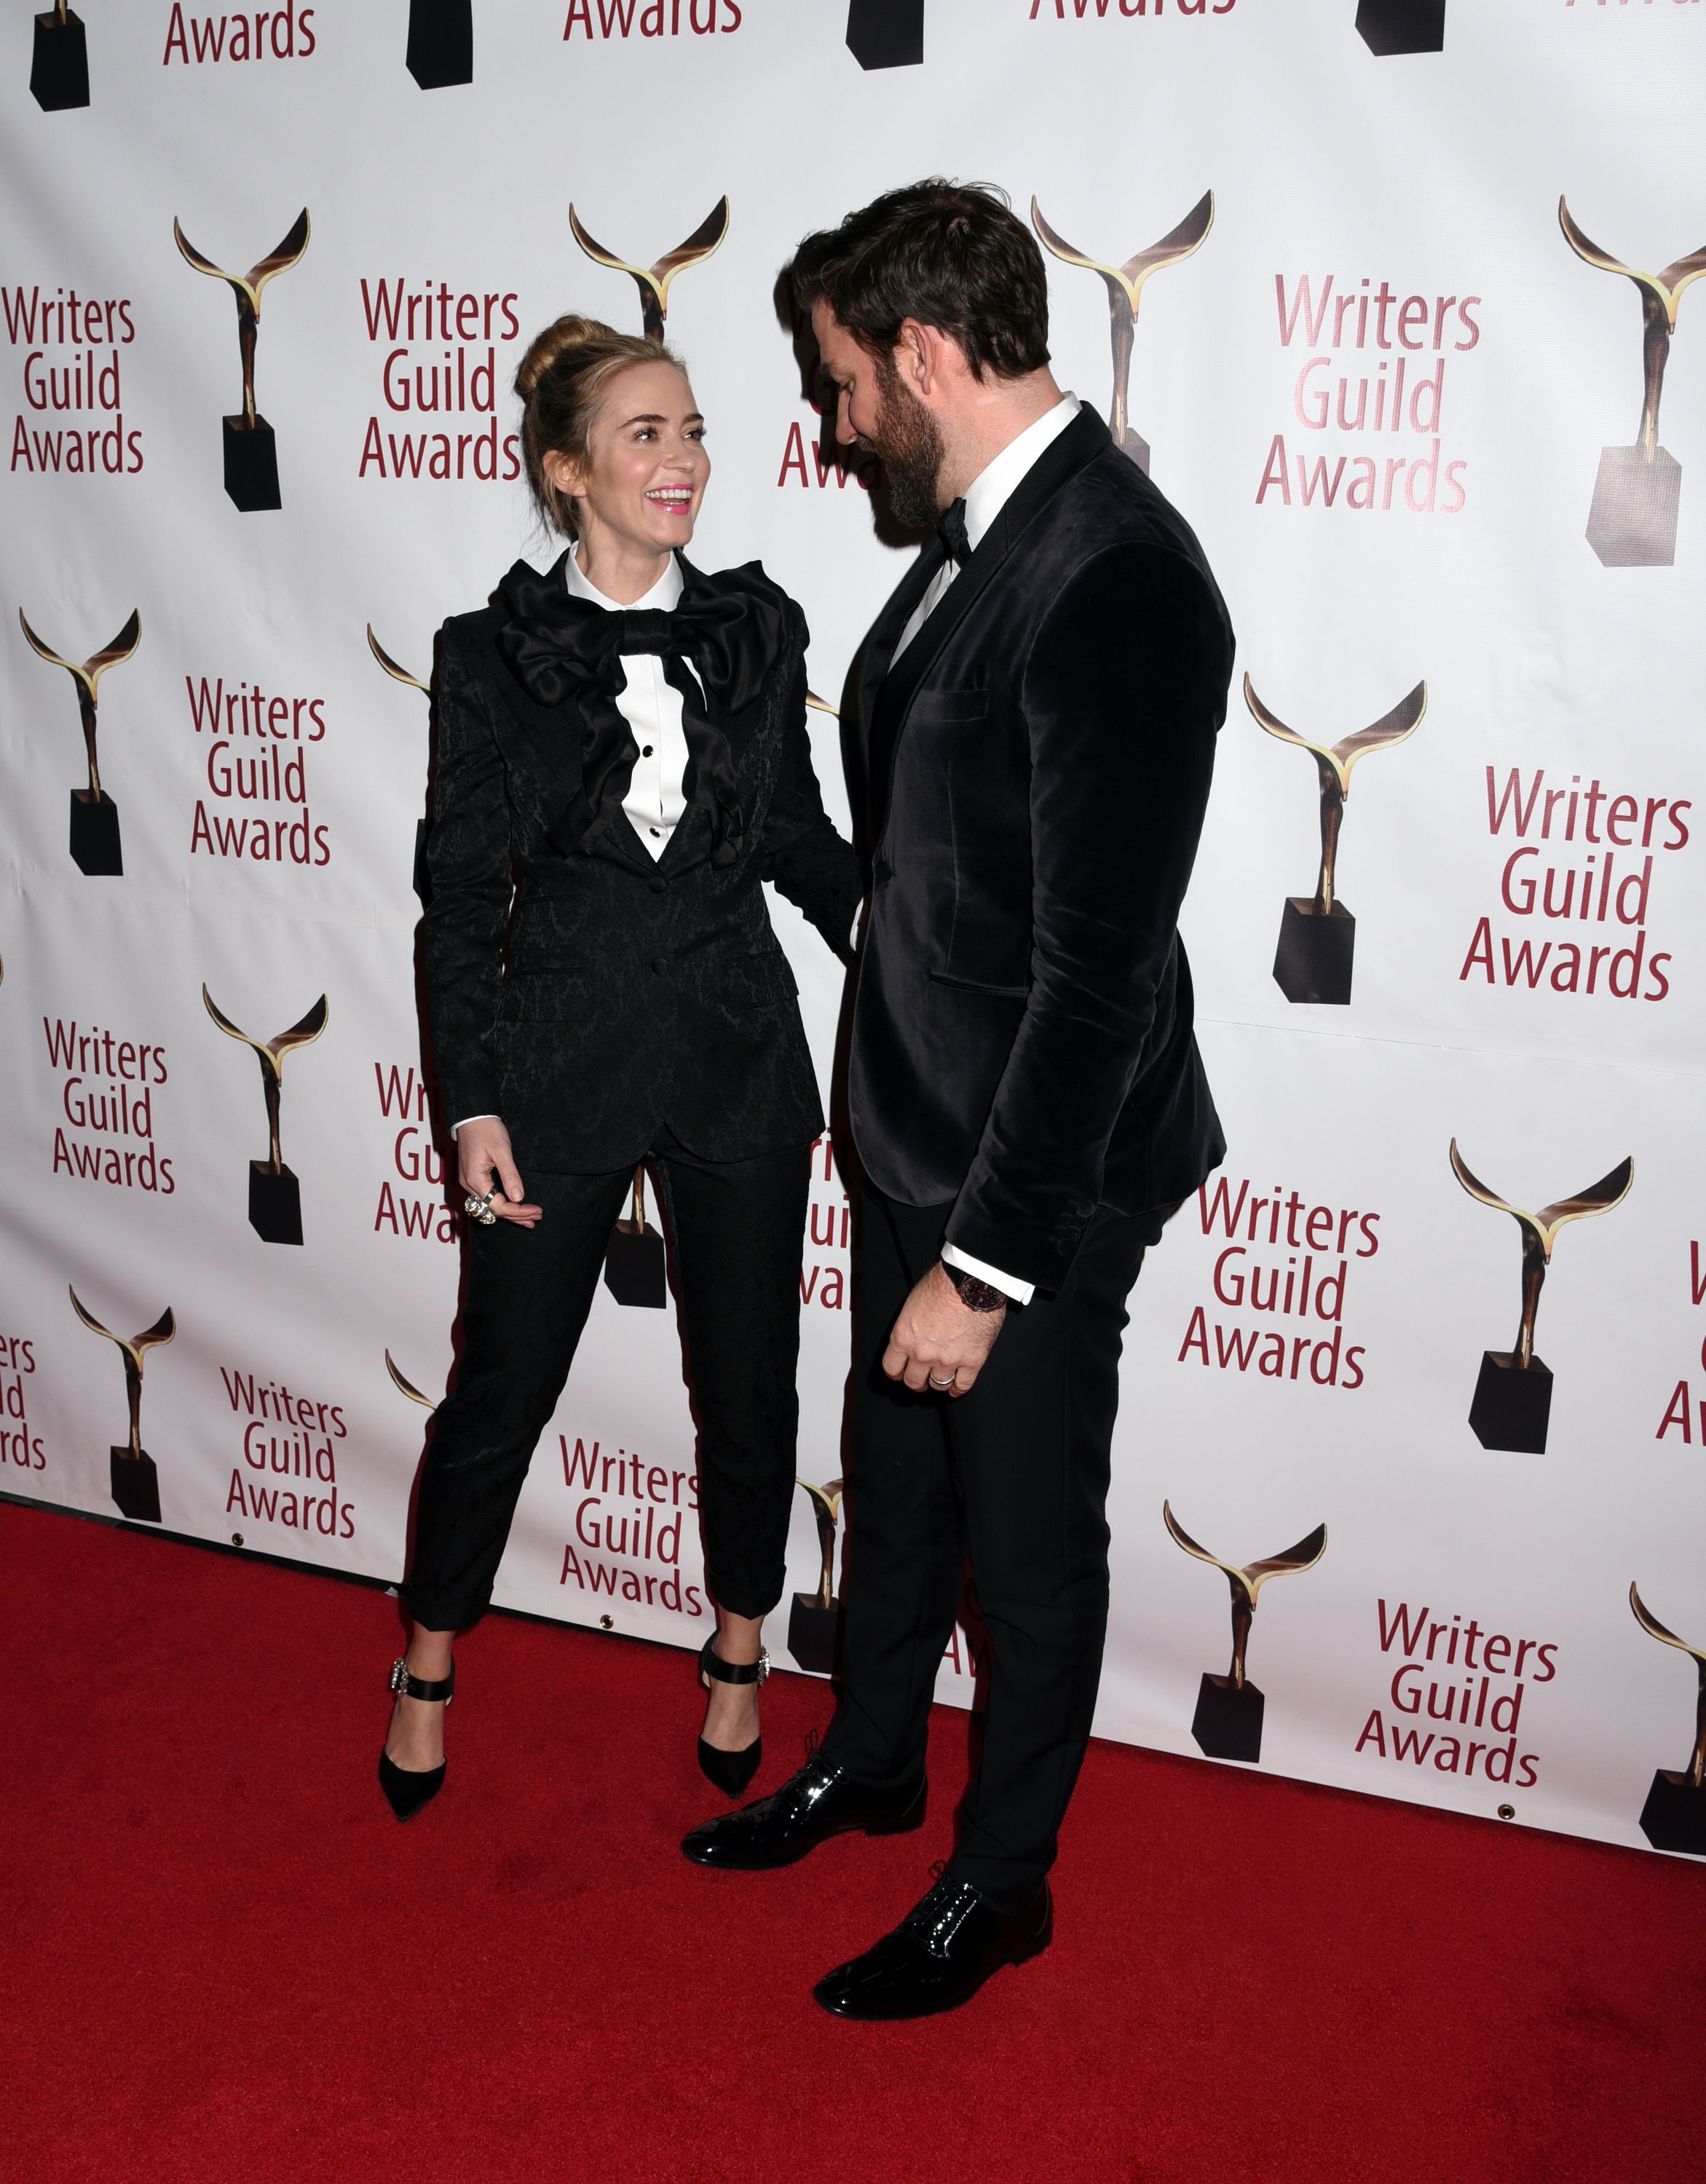 2019-02-17-71st-Annual-Writers-Guild-Awards-136.jpg